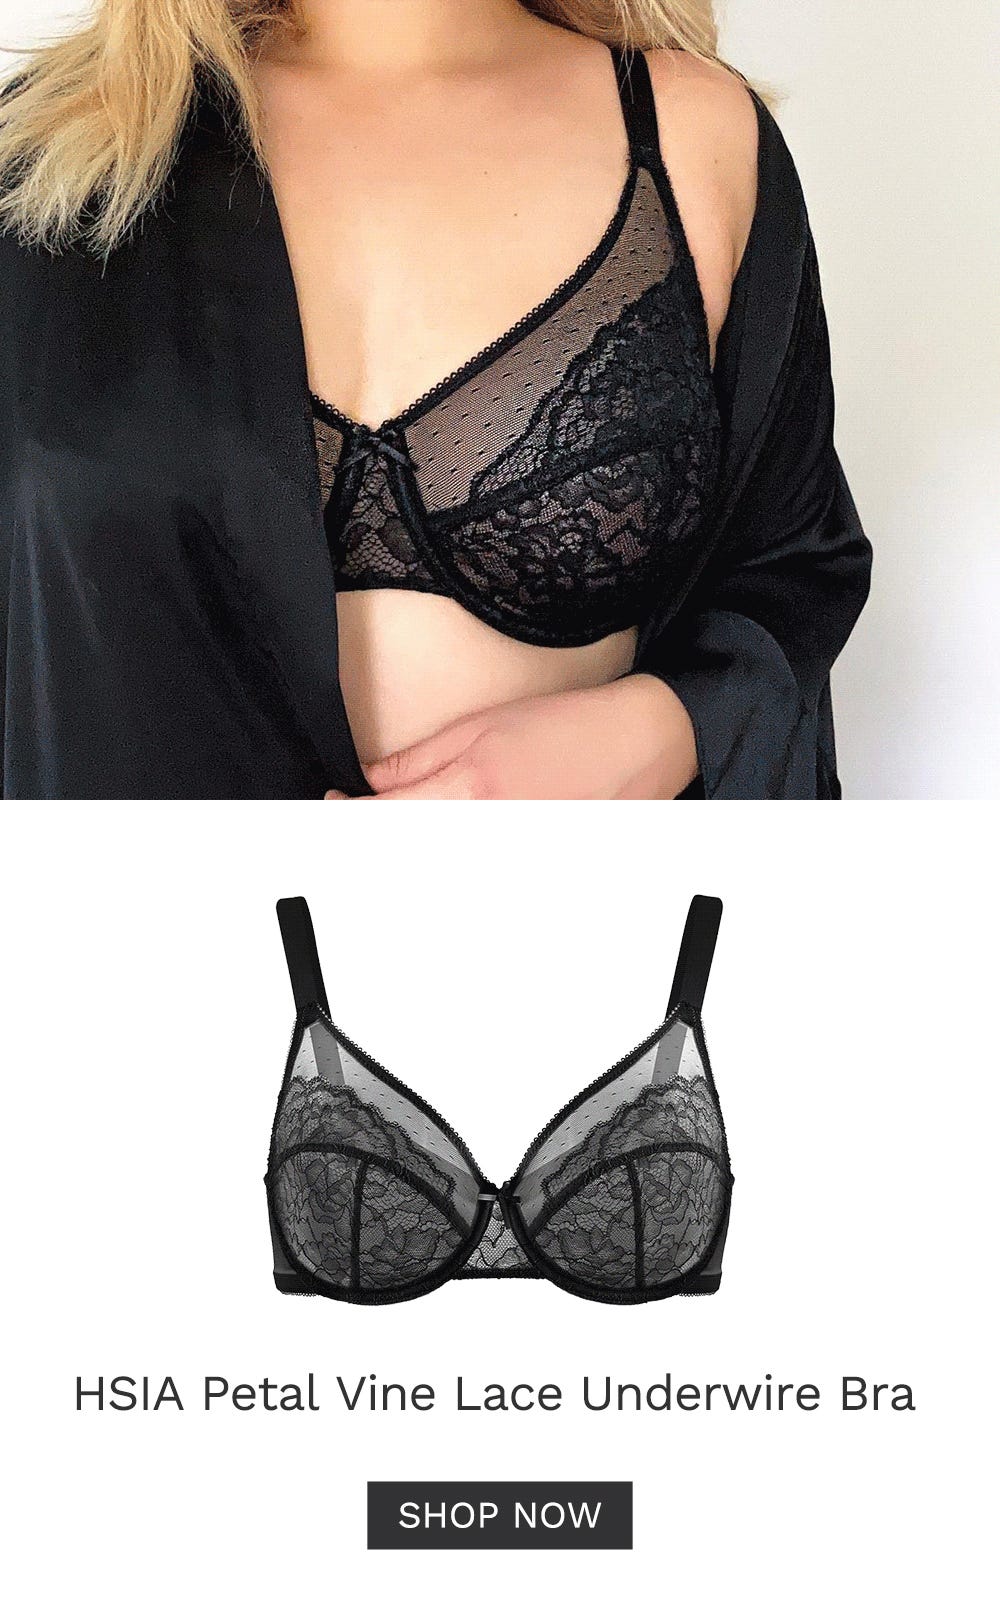 Bra Etiquette: Choosing the Right Bra for Every Occasion, by Hsia Lingerie